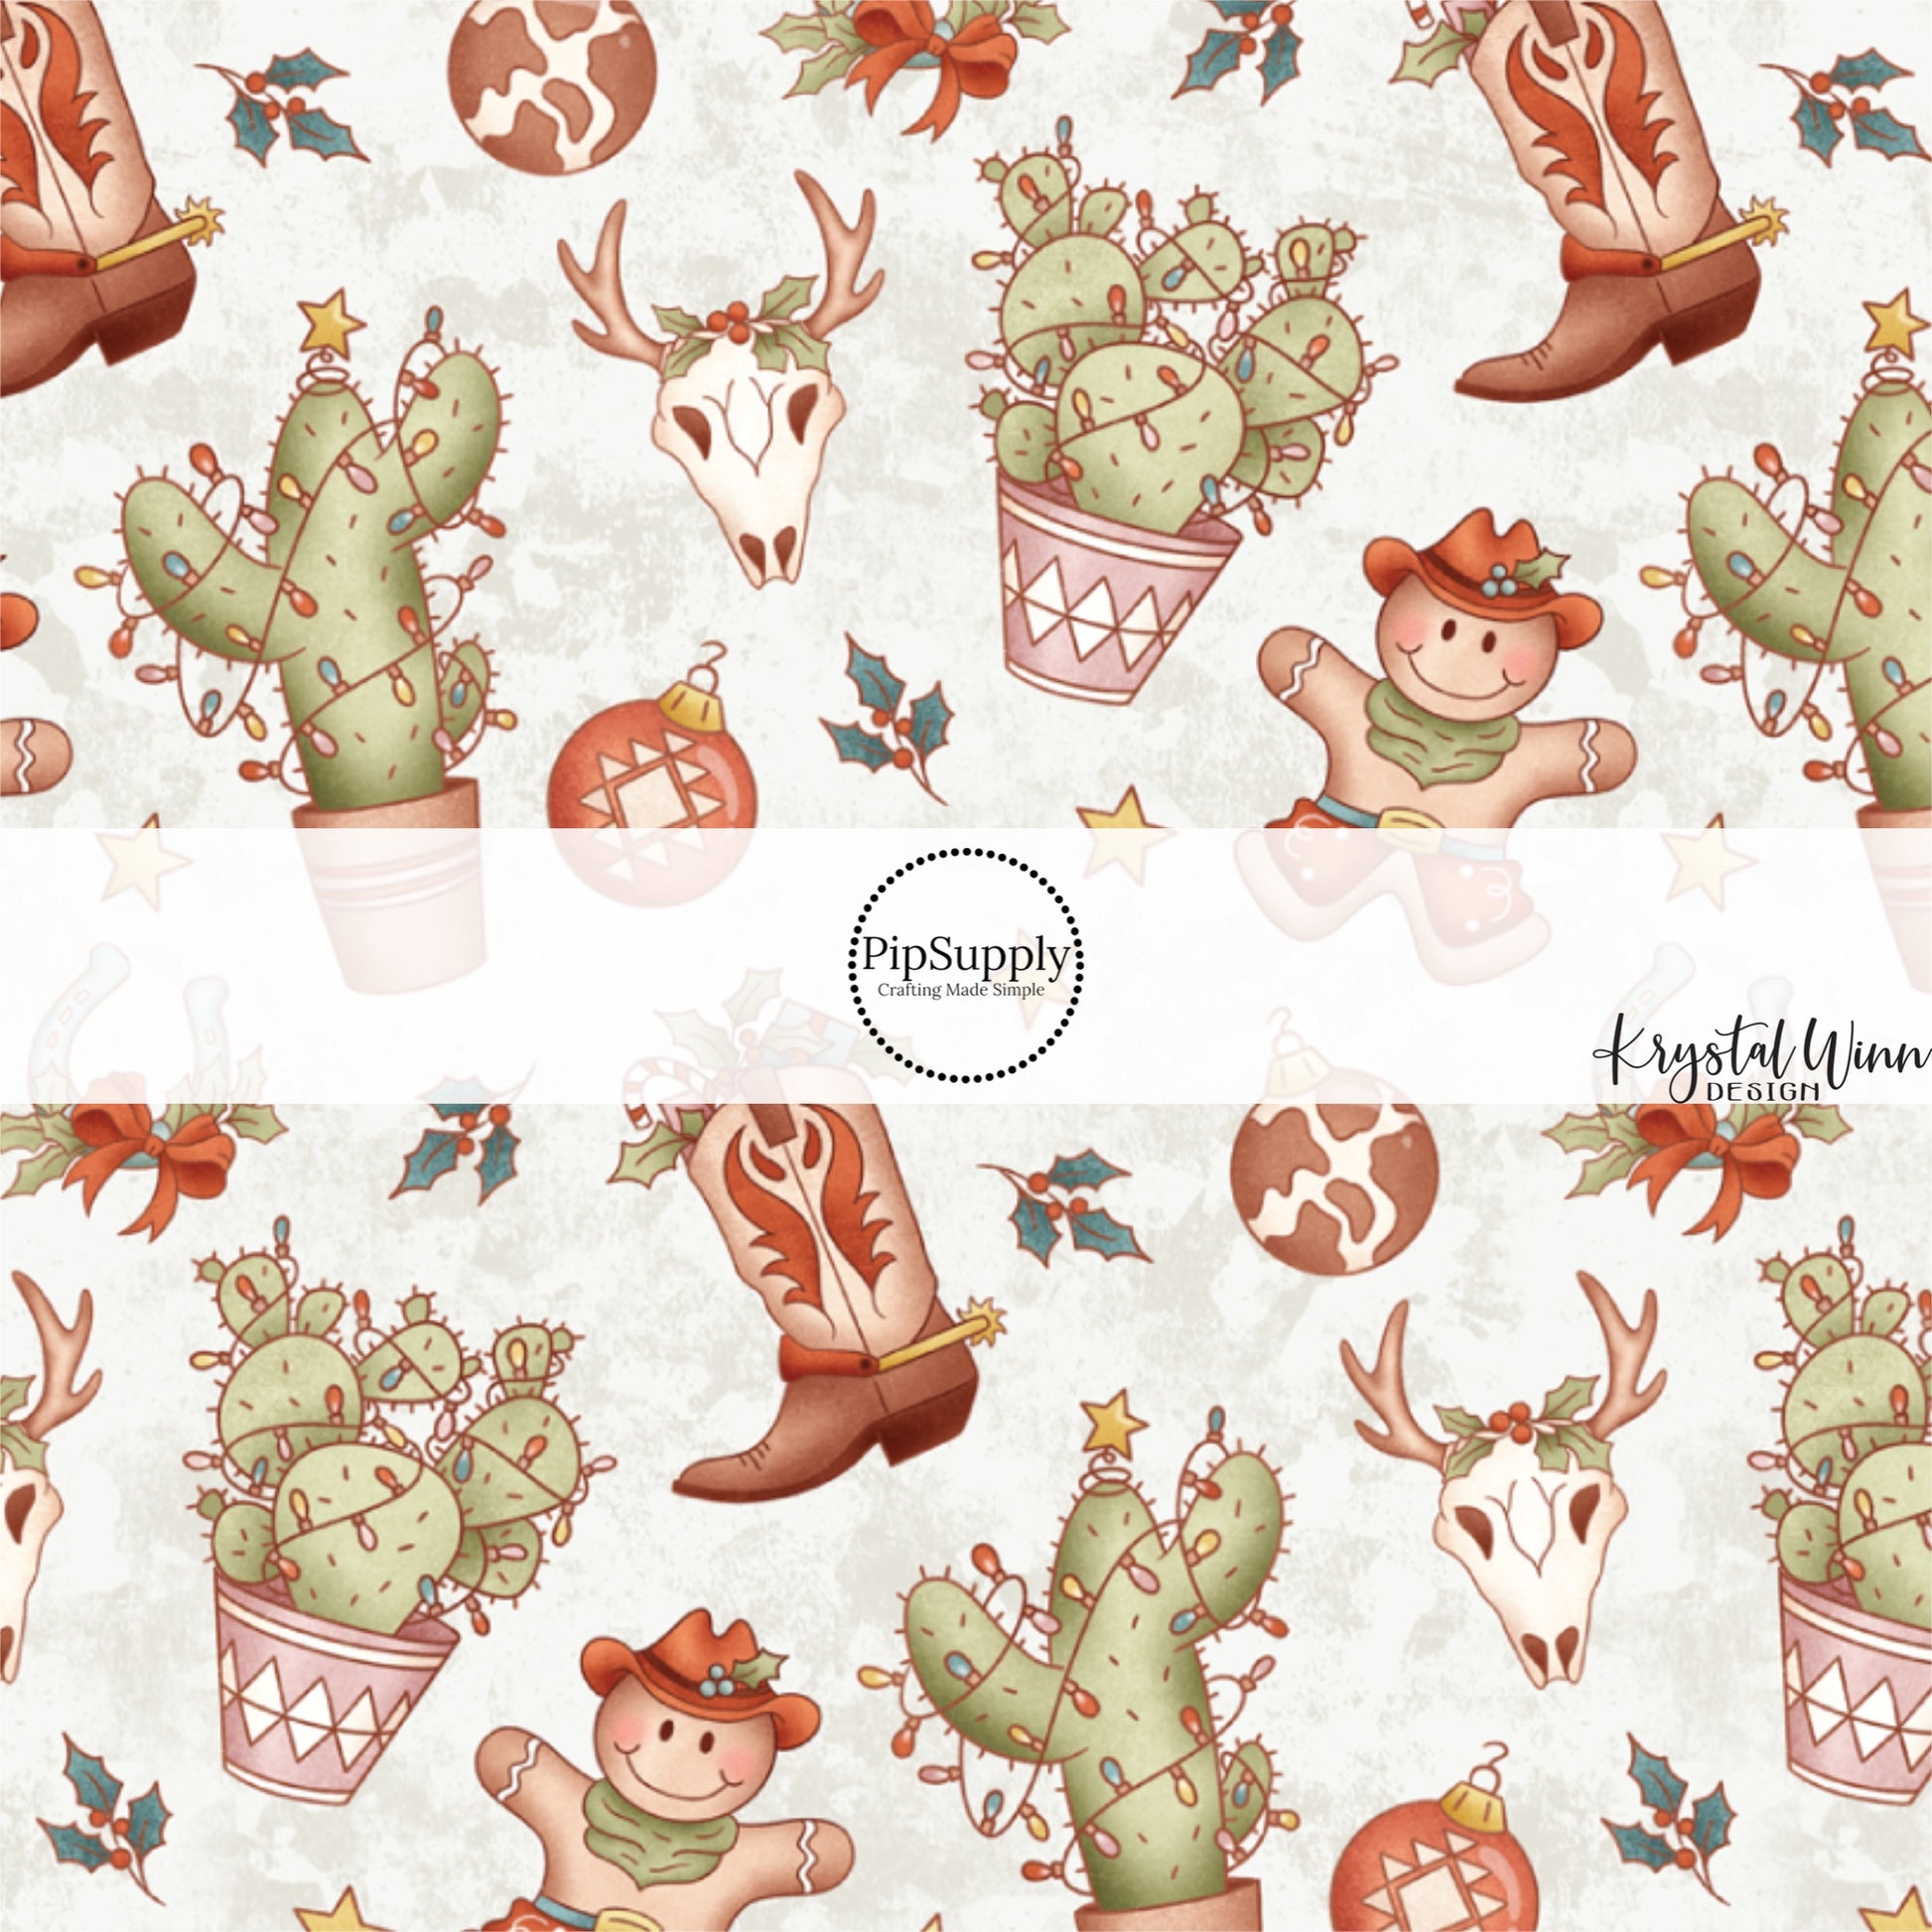 These holiday pattern themed fabric by the yard features Western boots and items decorated for Christmas. This fun Christmas fabric can be used for all your sewing and crafting needs!